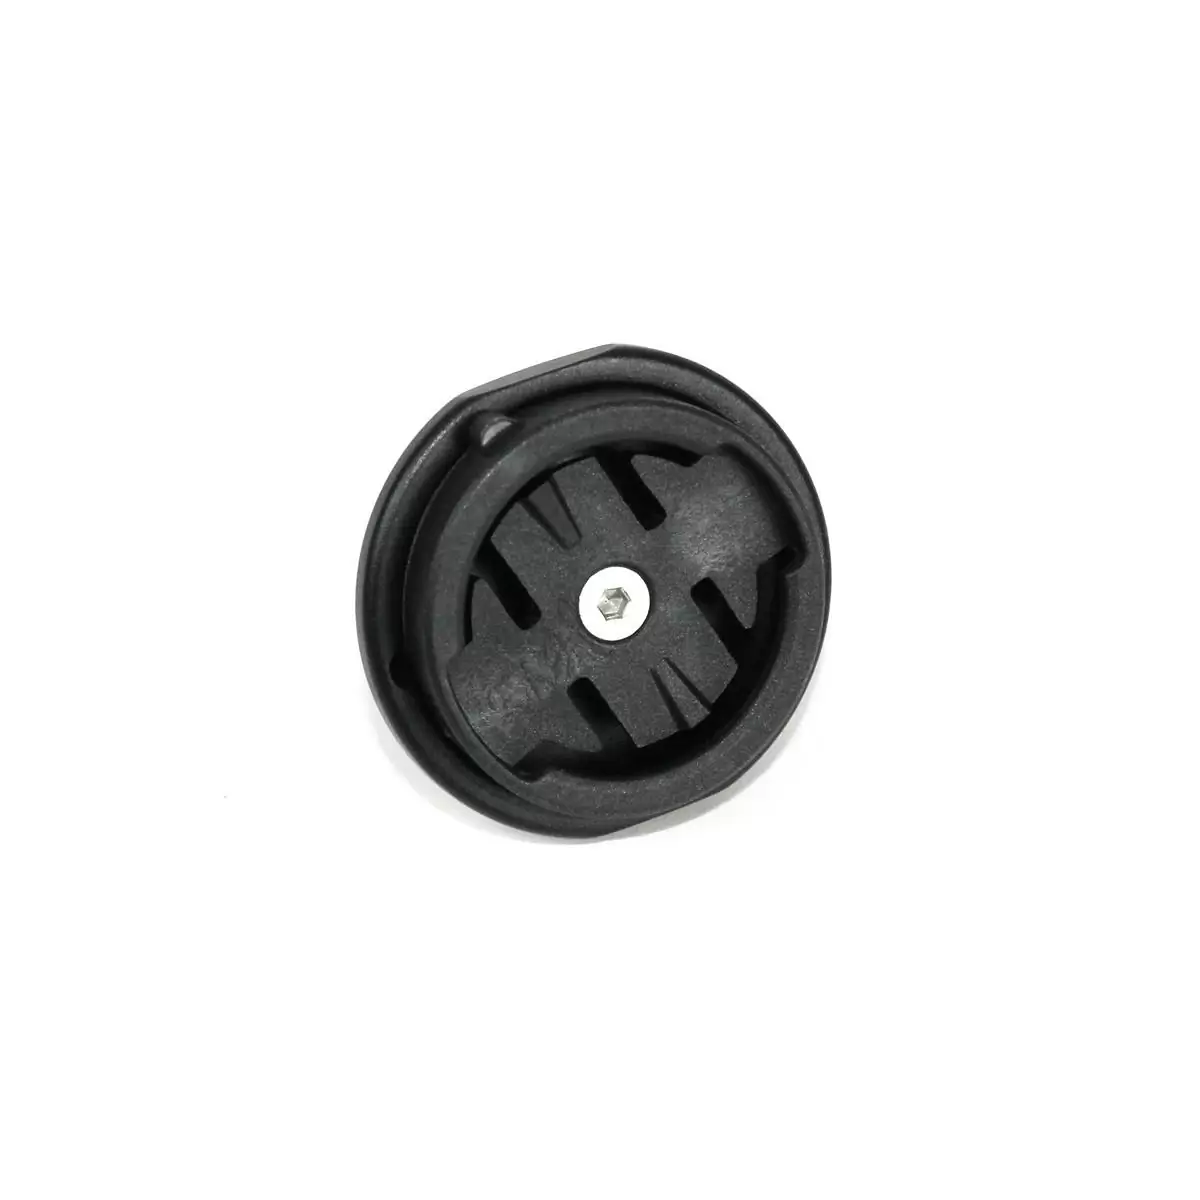 Ahead steering cap with Garmin connection #1